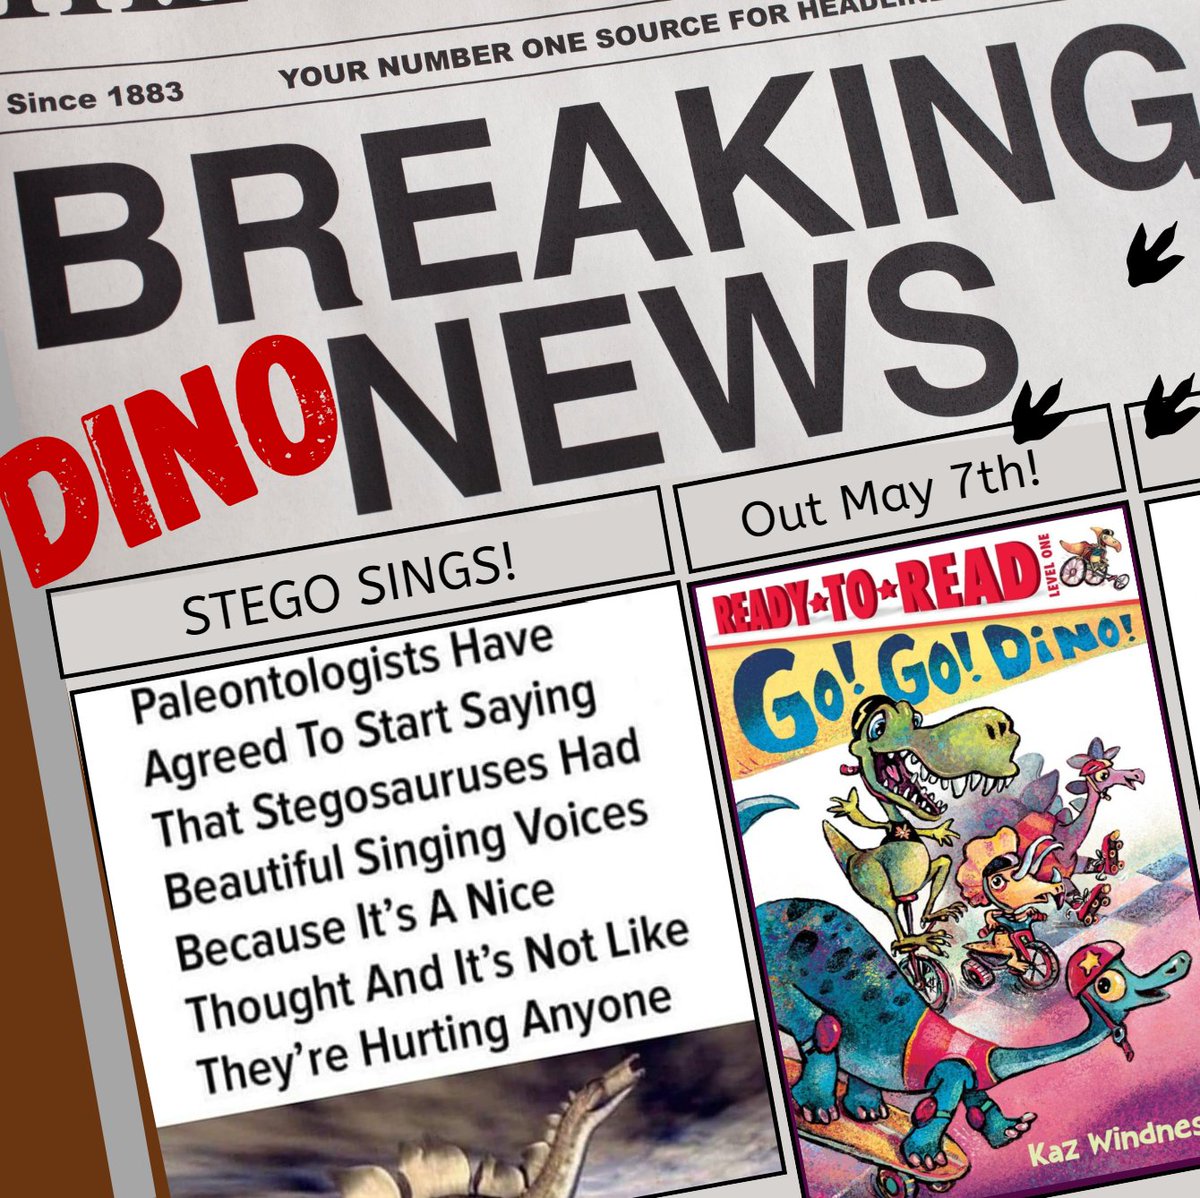 DINO NEWS! Out in just 2 weeks, dinosaurs race for glory in GO! GO! DINO! “An irresistible, everyone-win’s rhymefest” according to @kirkus_reviews. Race out & pr3-ord3r your copy today. Signed copies at Second Star to the Right Books. @simonkids #earlyreader #gogodino #dinosaurs